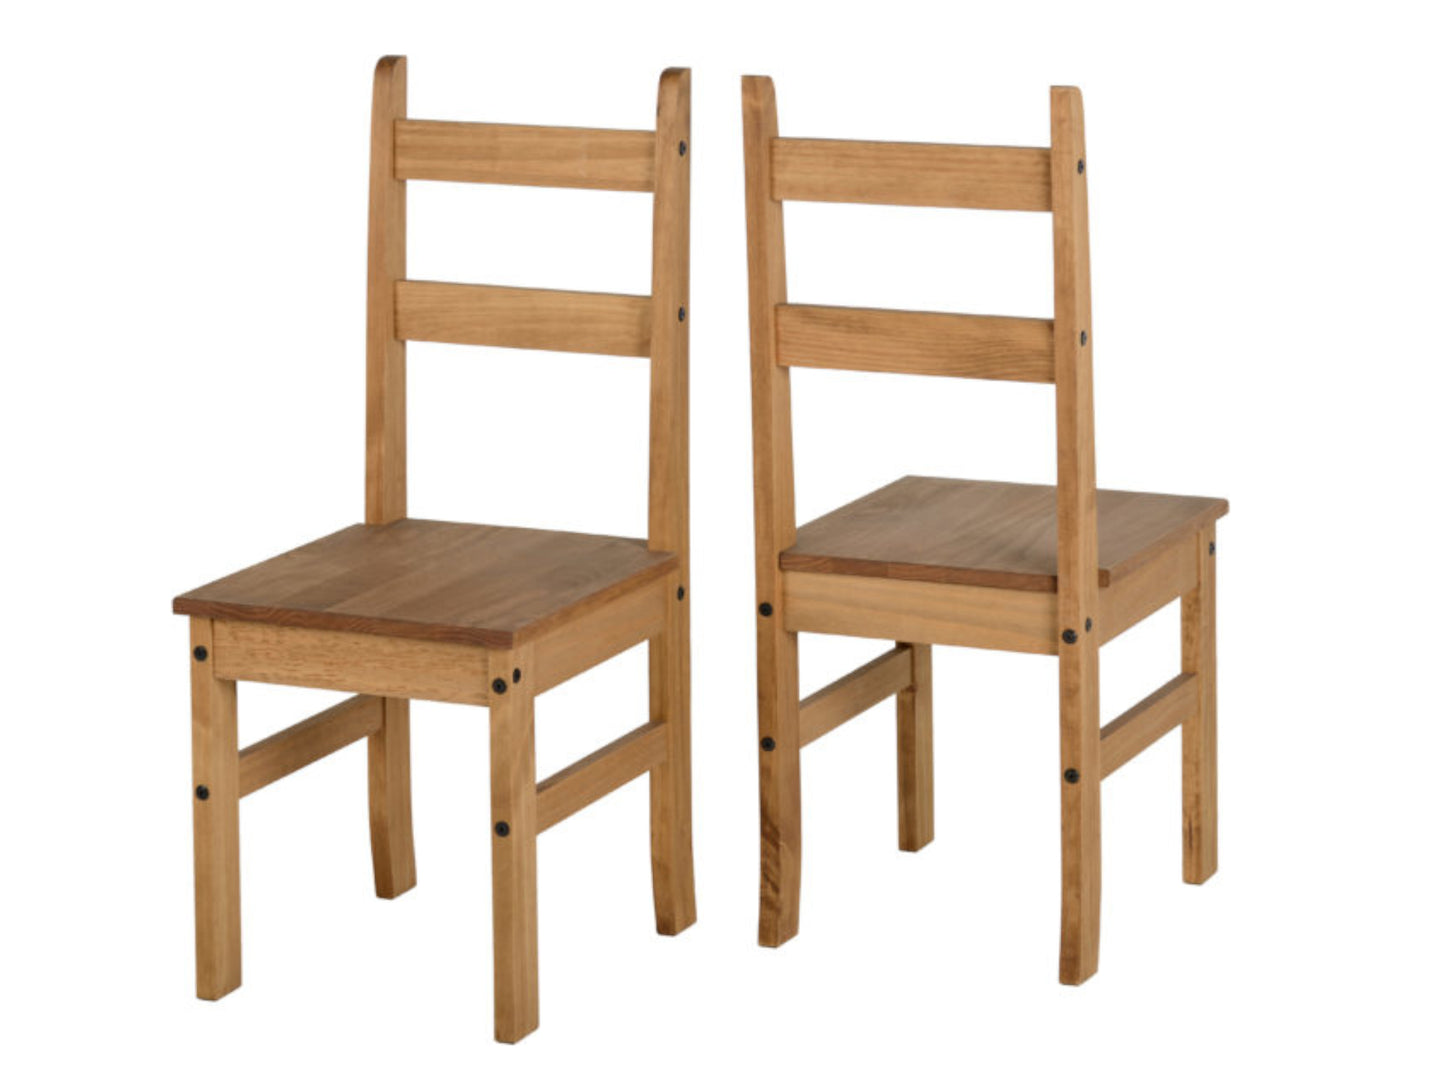 Corona Budget 4 Seat Dining Set in Distressed Waxed Pine